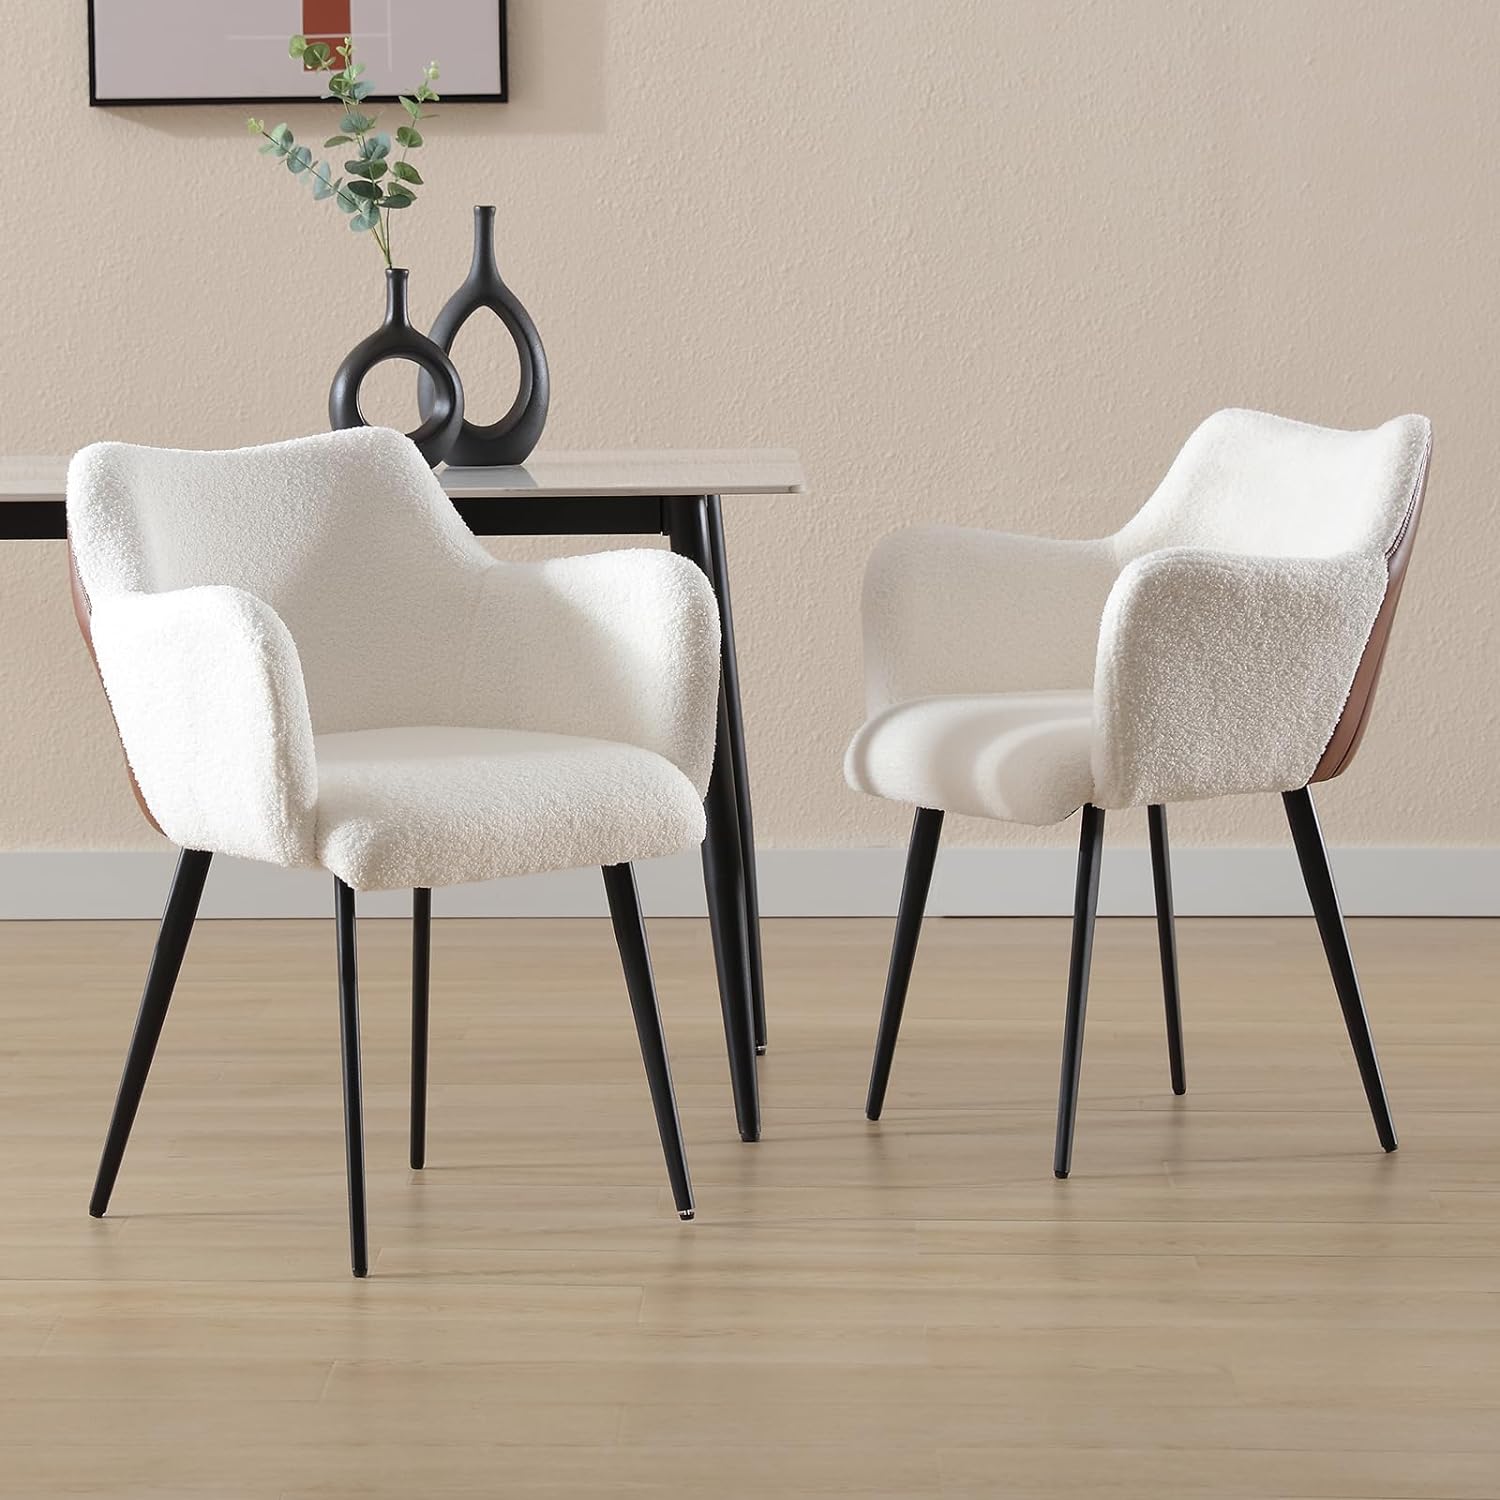 Replaced my kitchen chairs with these and very happy with purchase. Chairs arrived timely, were very well packaged and relatively easy to assemble. They seem comfortable and price was good!